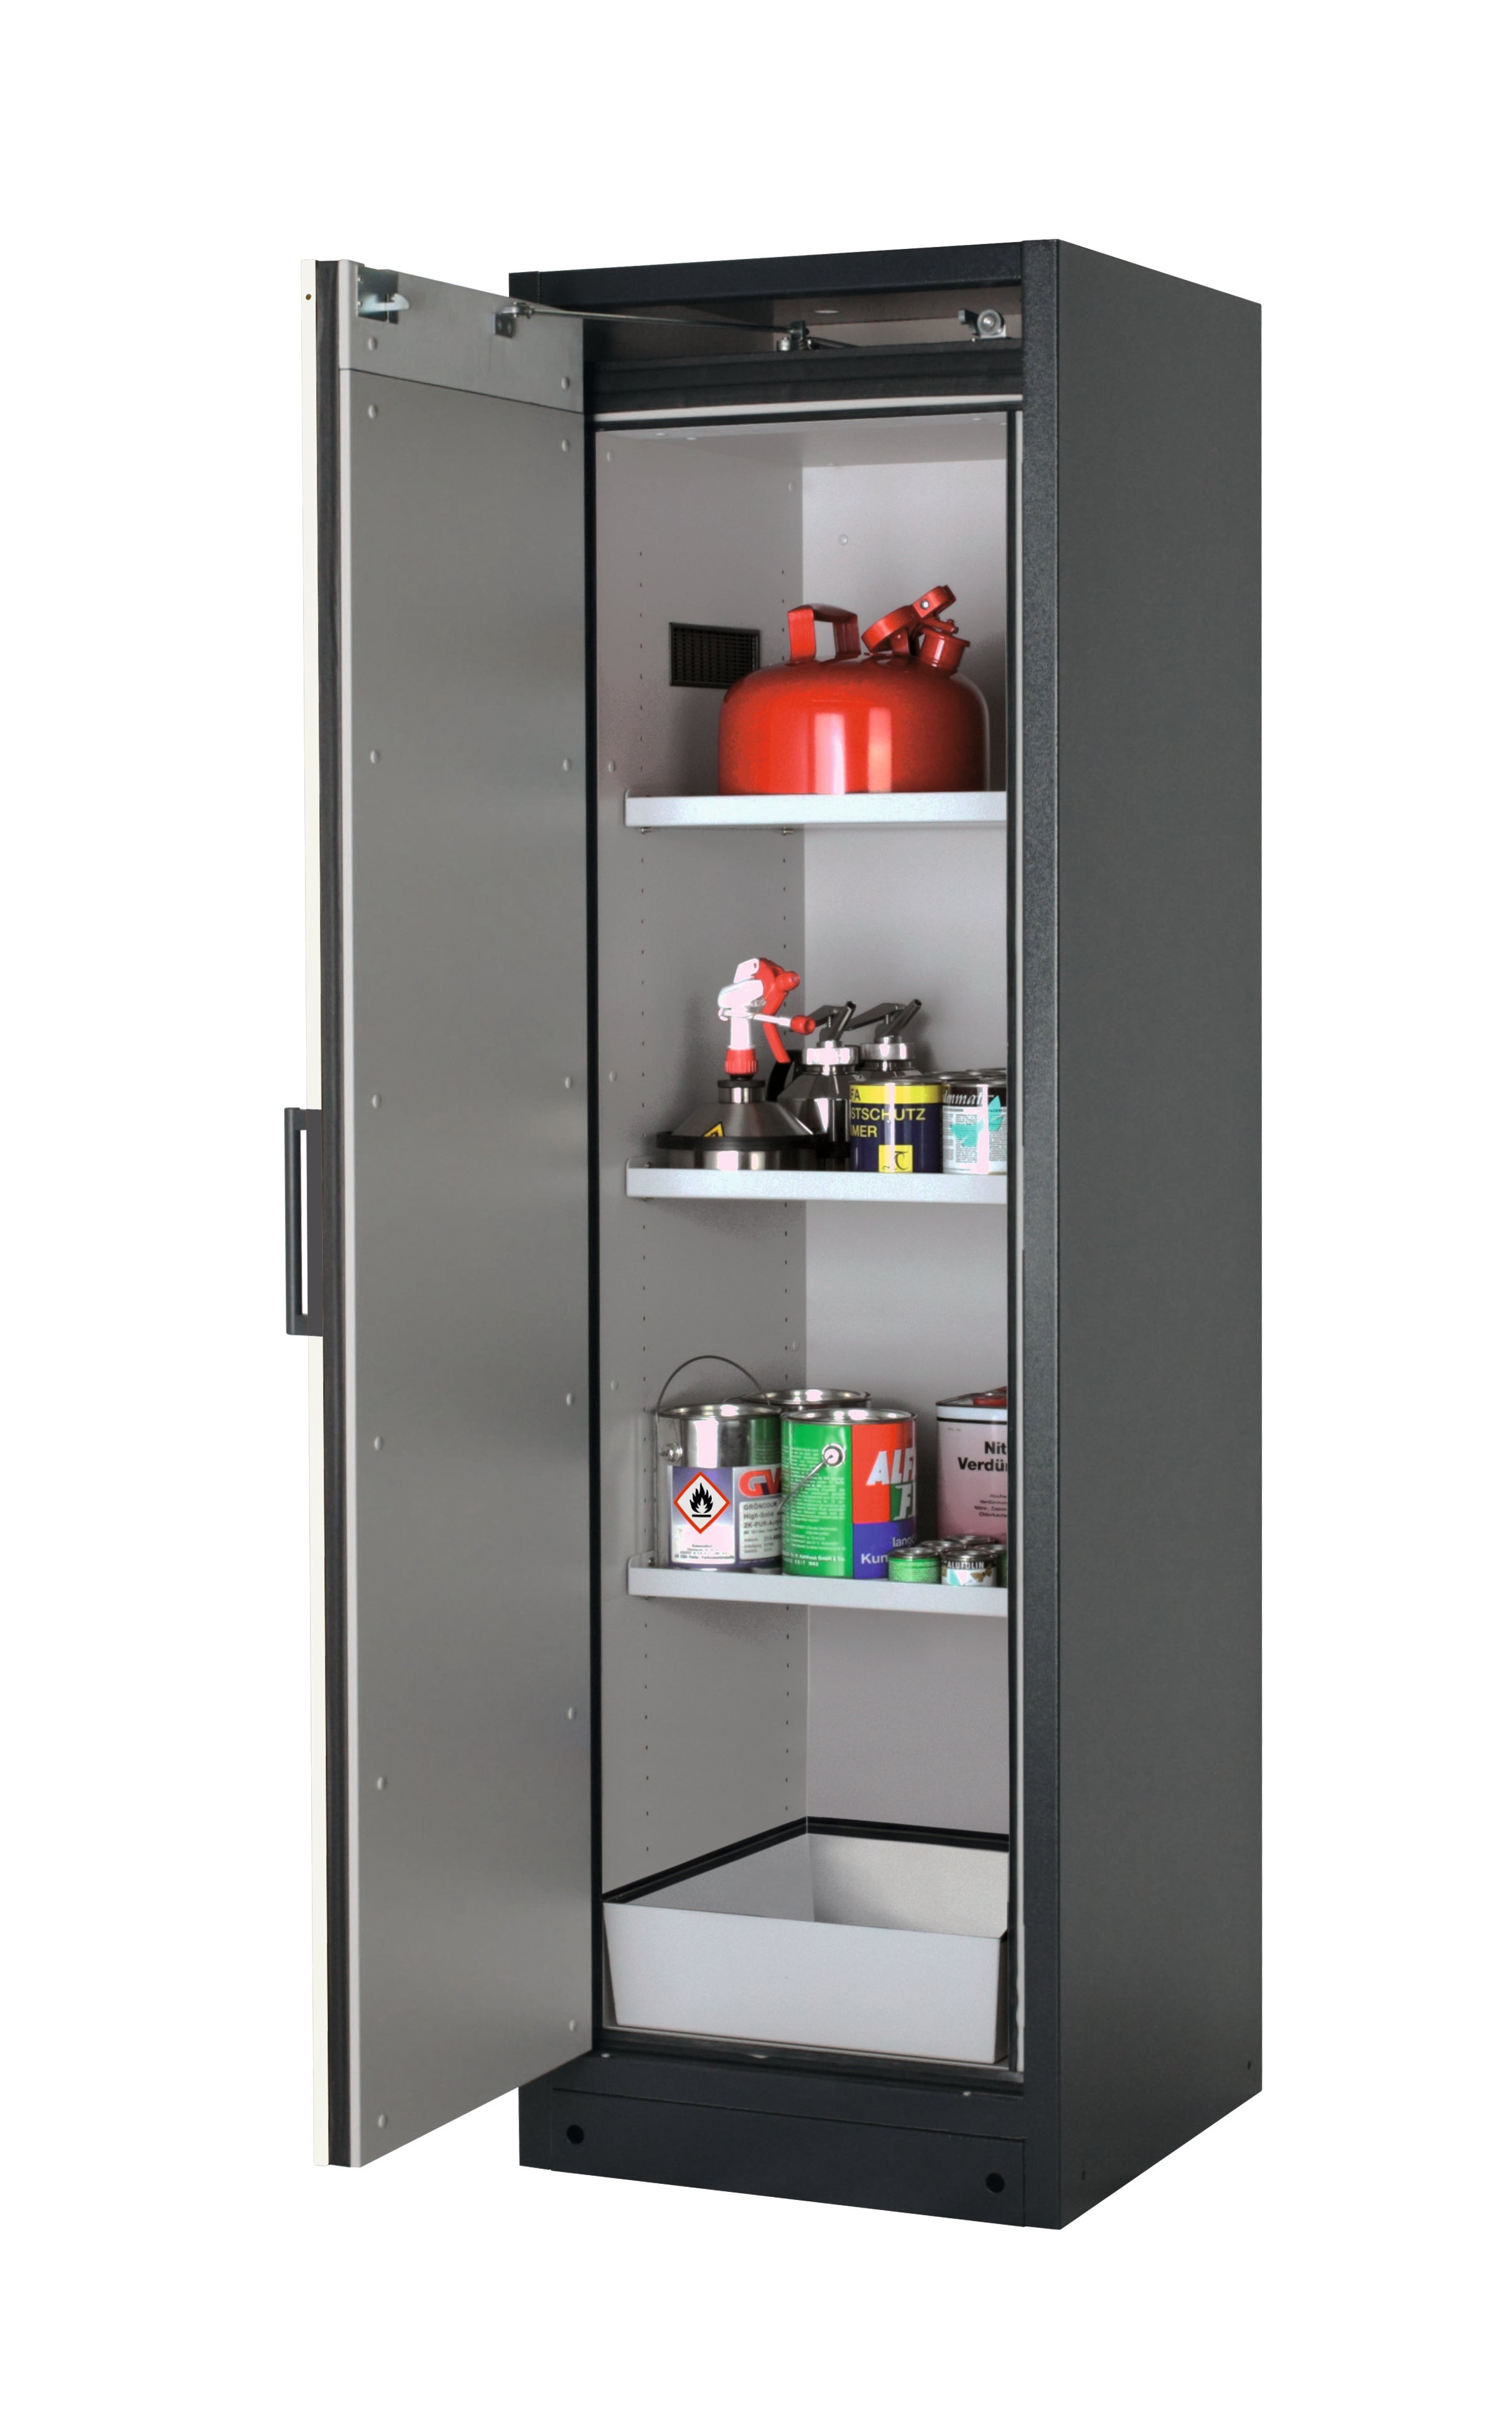 Type 90 safety storage cabinet Q-PEGASUS-90 model Q90.195.060.WDAC in asecos silver with 3x shelf standard (sheet steel),